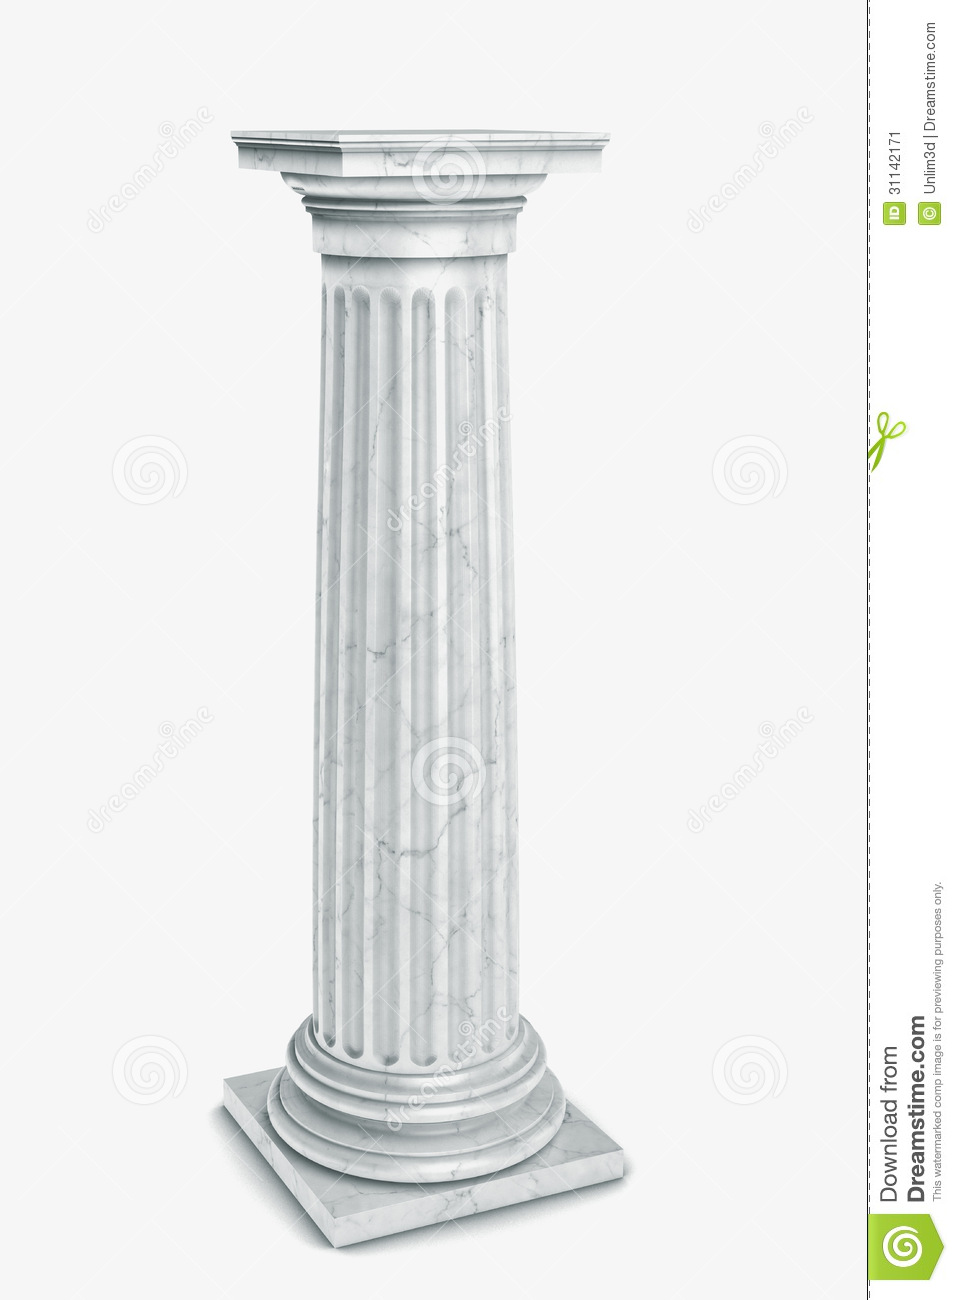 Single Greek Column Isolated On White  See My Other Works In Portfolio